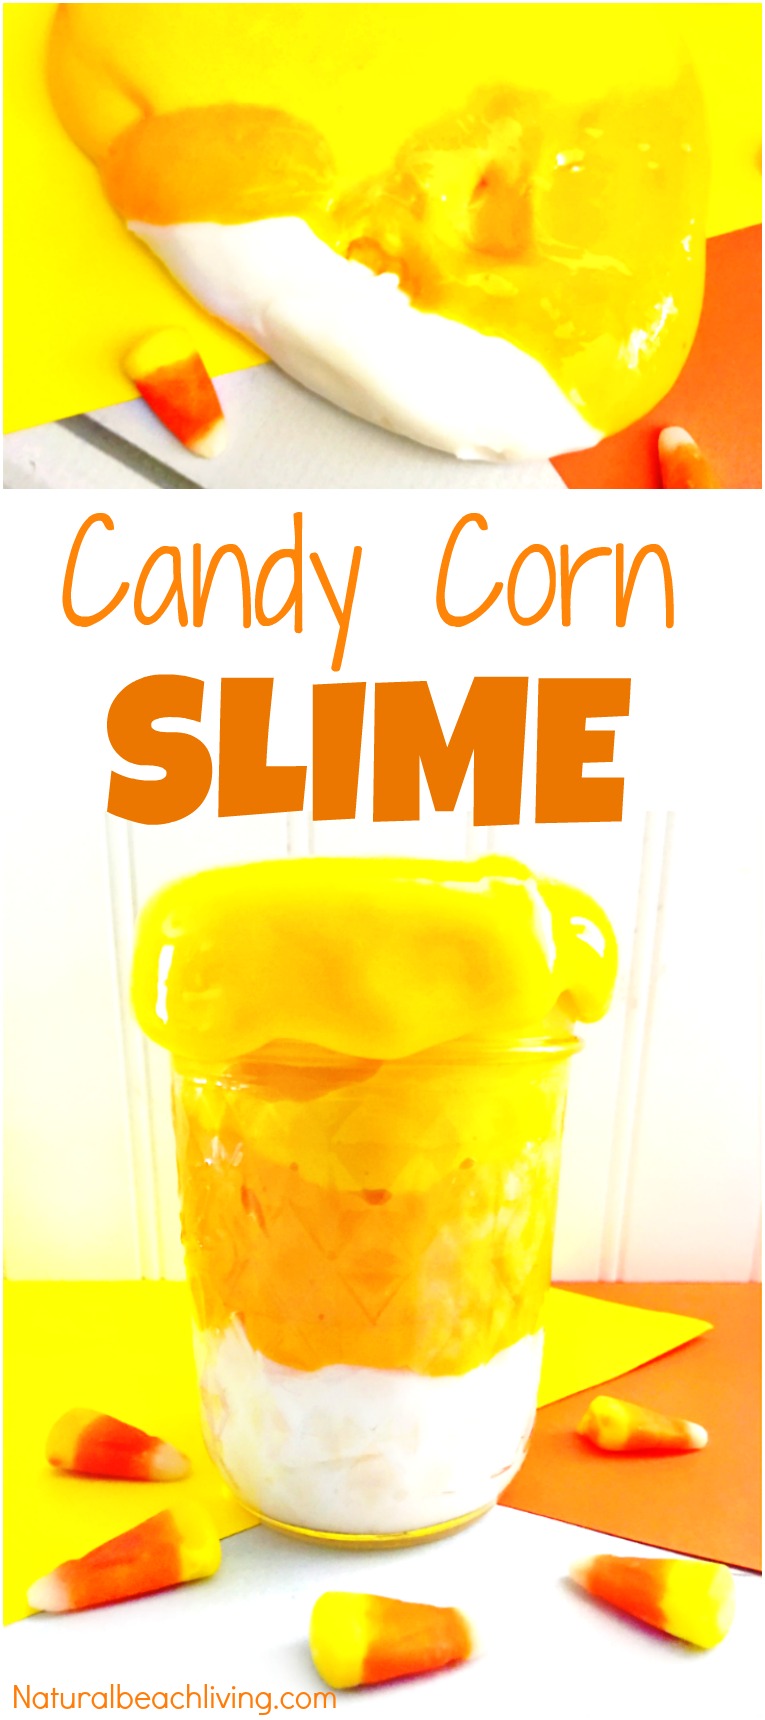 25+ Halloween Slime Ideas Kids Will Love, Halloween Slime Recipes that are Super Cool and Perfect for a Halloween Party. Jiggly Slime and Glow in the Dark Slime, Slime Recipe with Contact Solution plus awesome Fluffy Slime Recipe